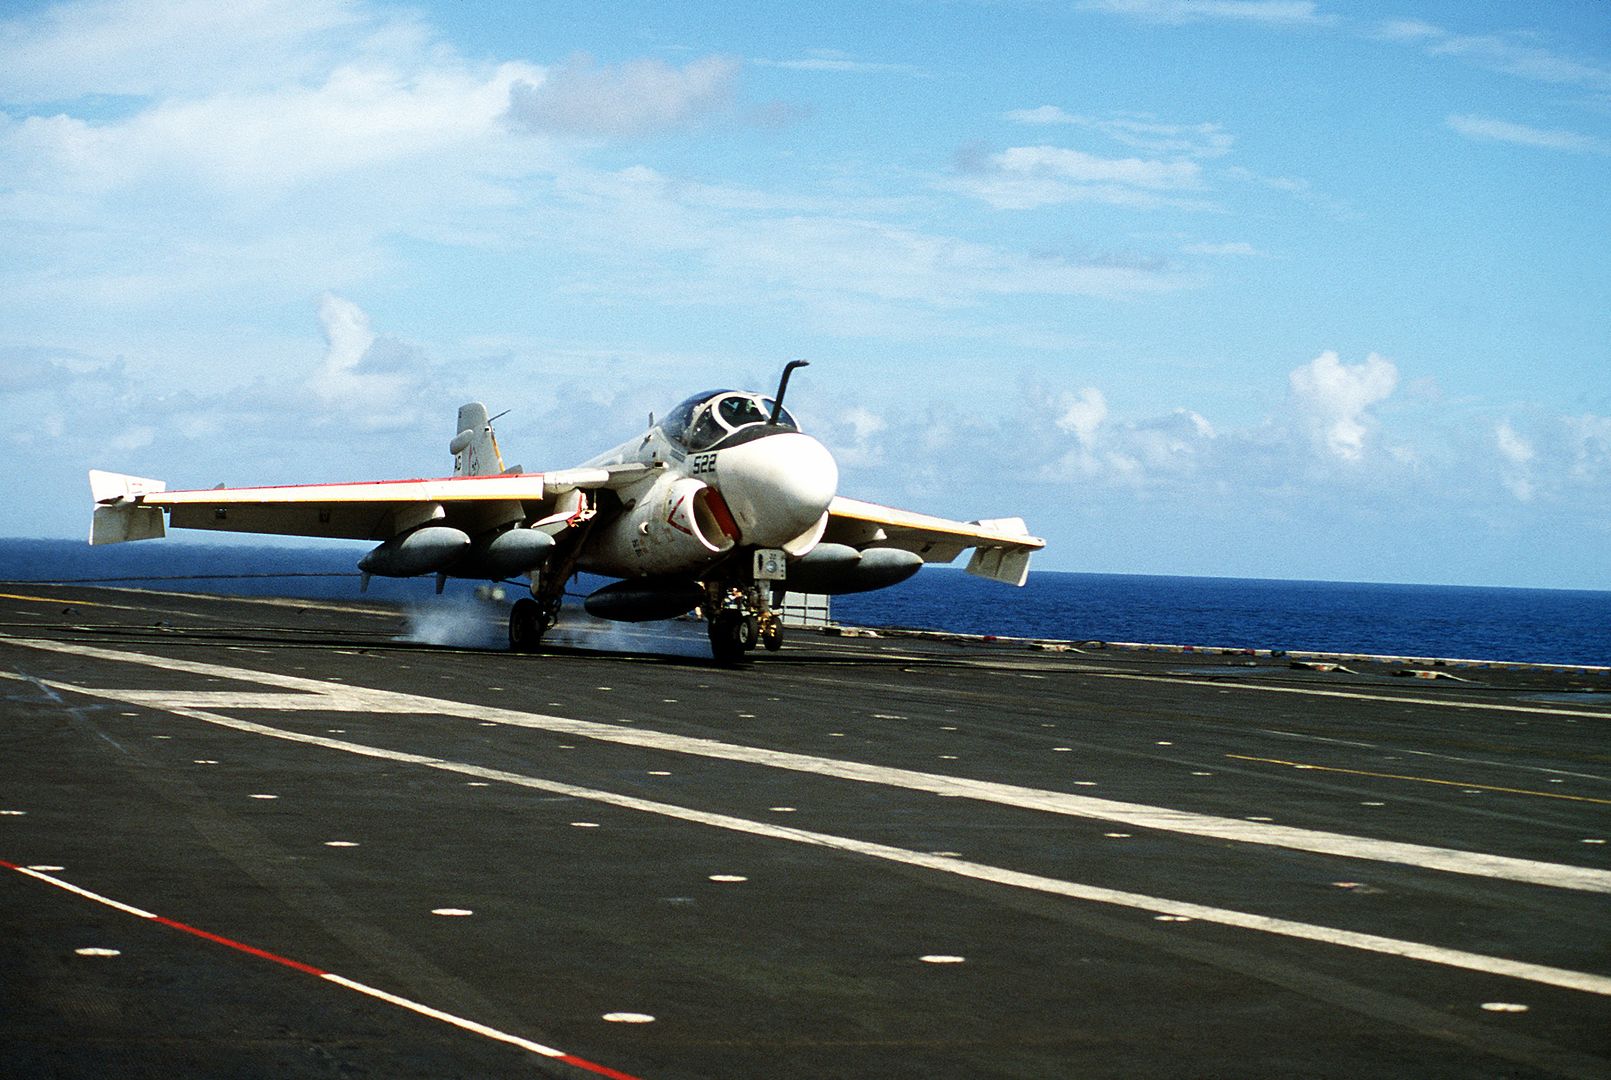 An A 6 Intruder Aircraft Engages An Arresting Cable After Landing Aboard The Aircraft Carrier USS SARATOGA 